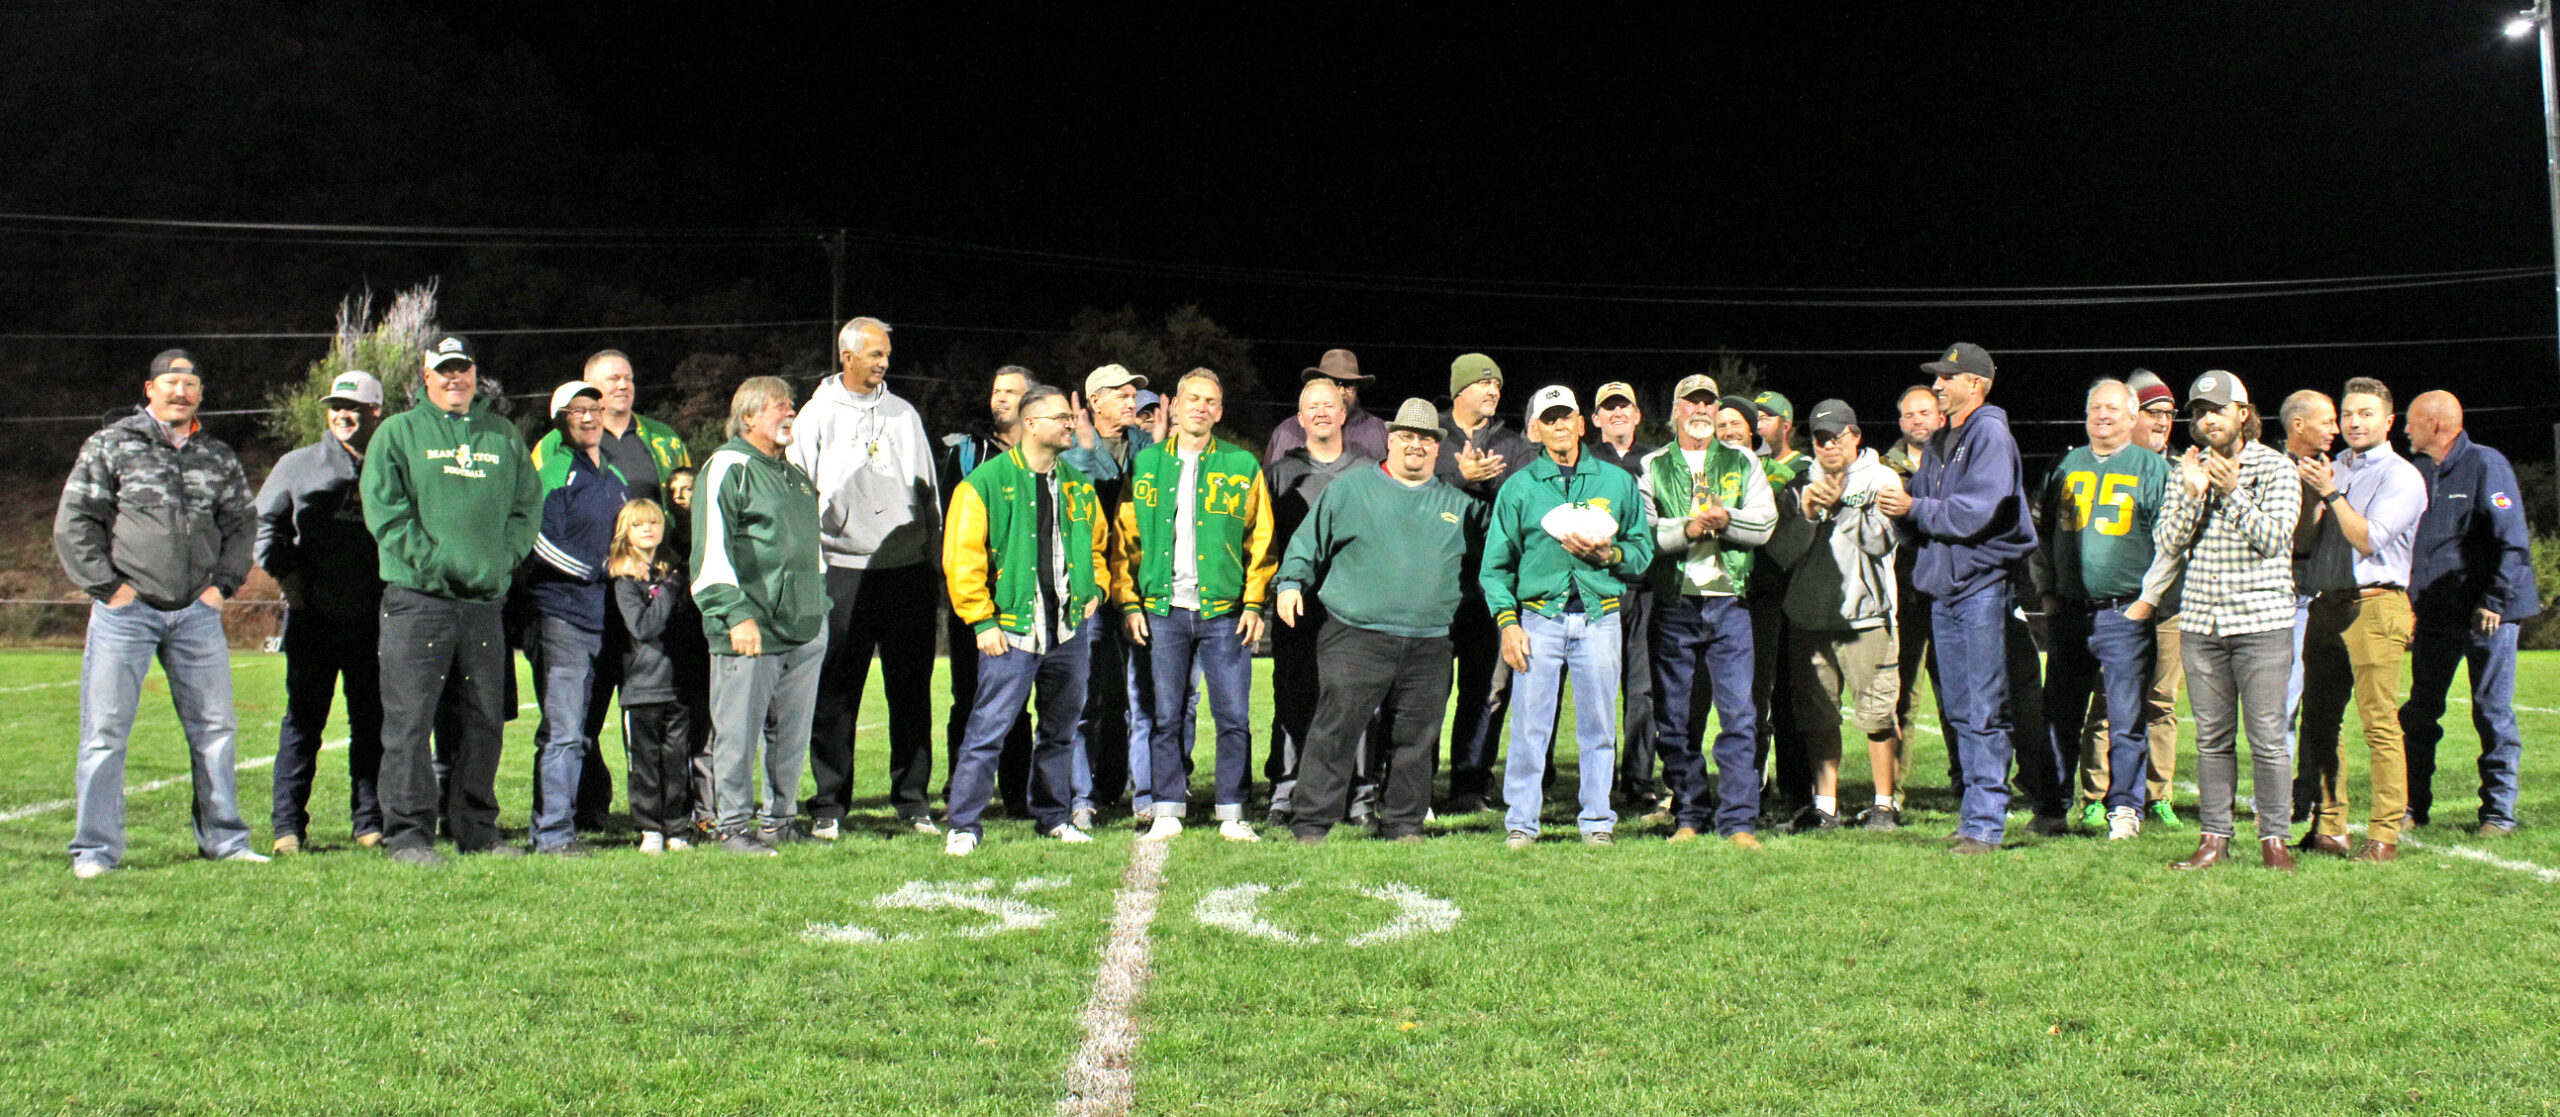 Photo by Daniel Mohrmann. Former players and coaches gather at halftime of the Oct. 21 game against La Junta to honor longtime Manitou football coach George Rykovich.